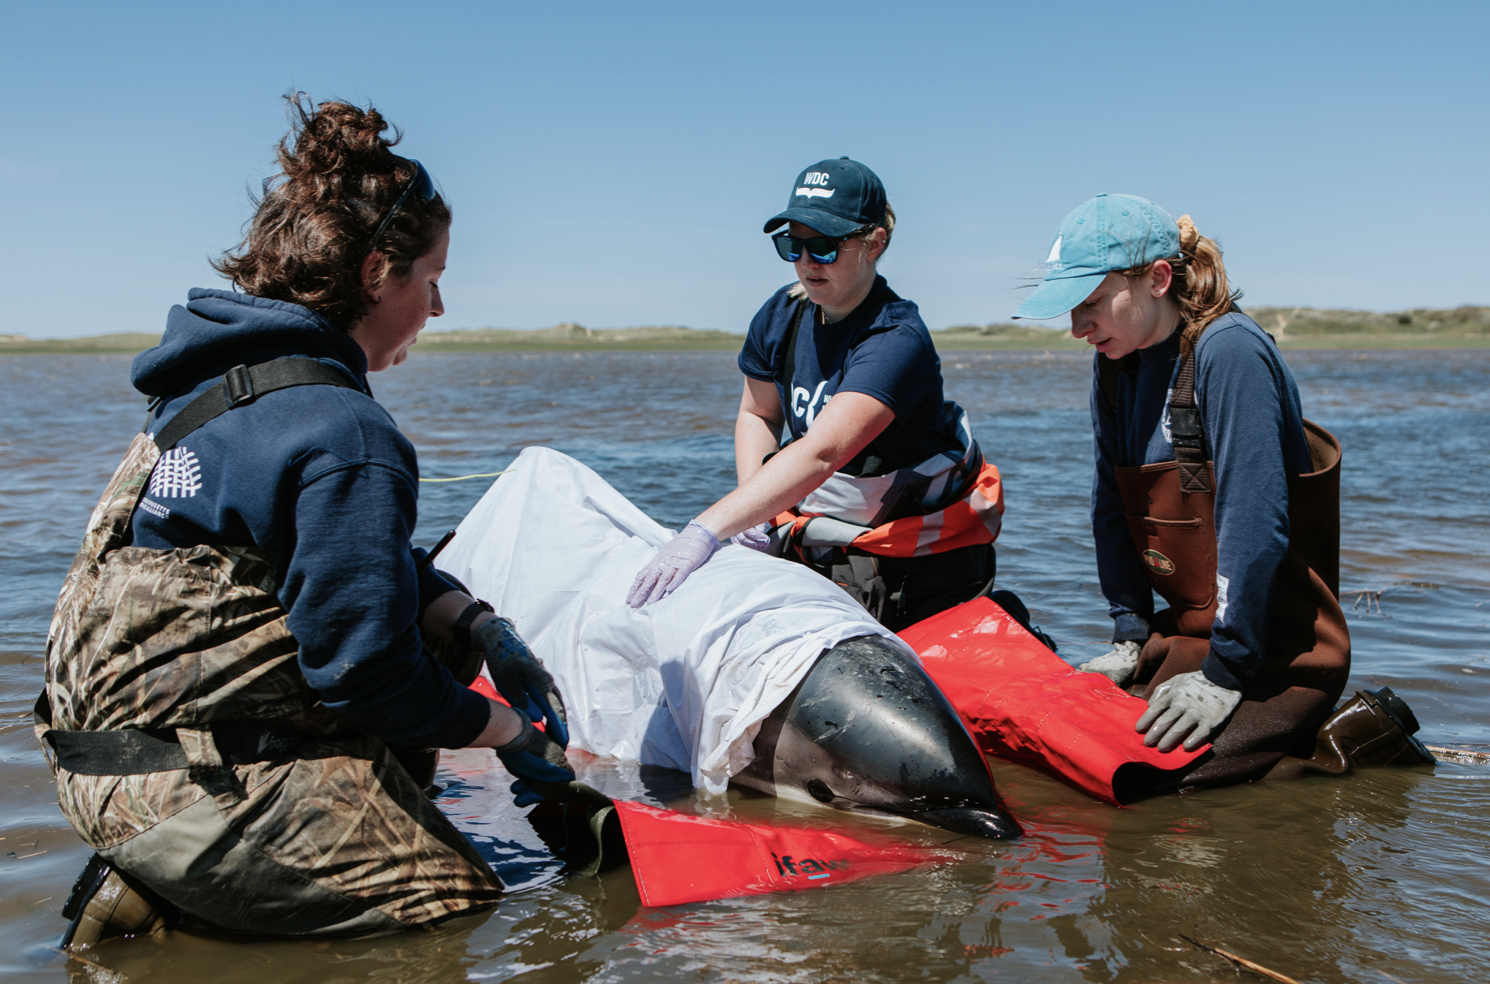 Rescue team saving beached dolphin